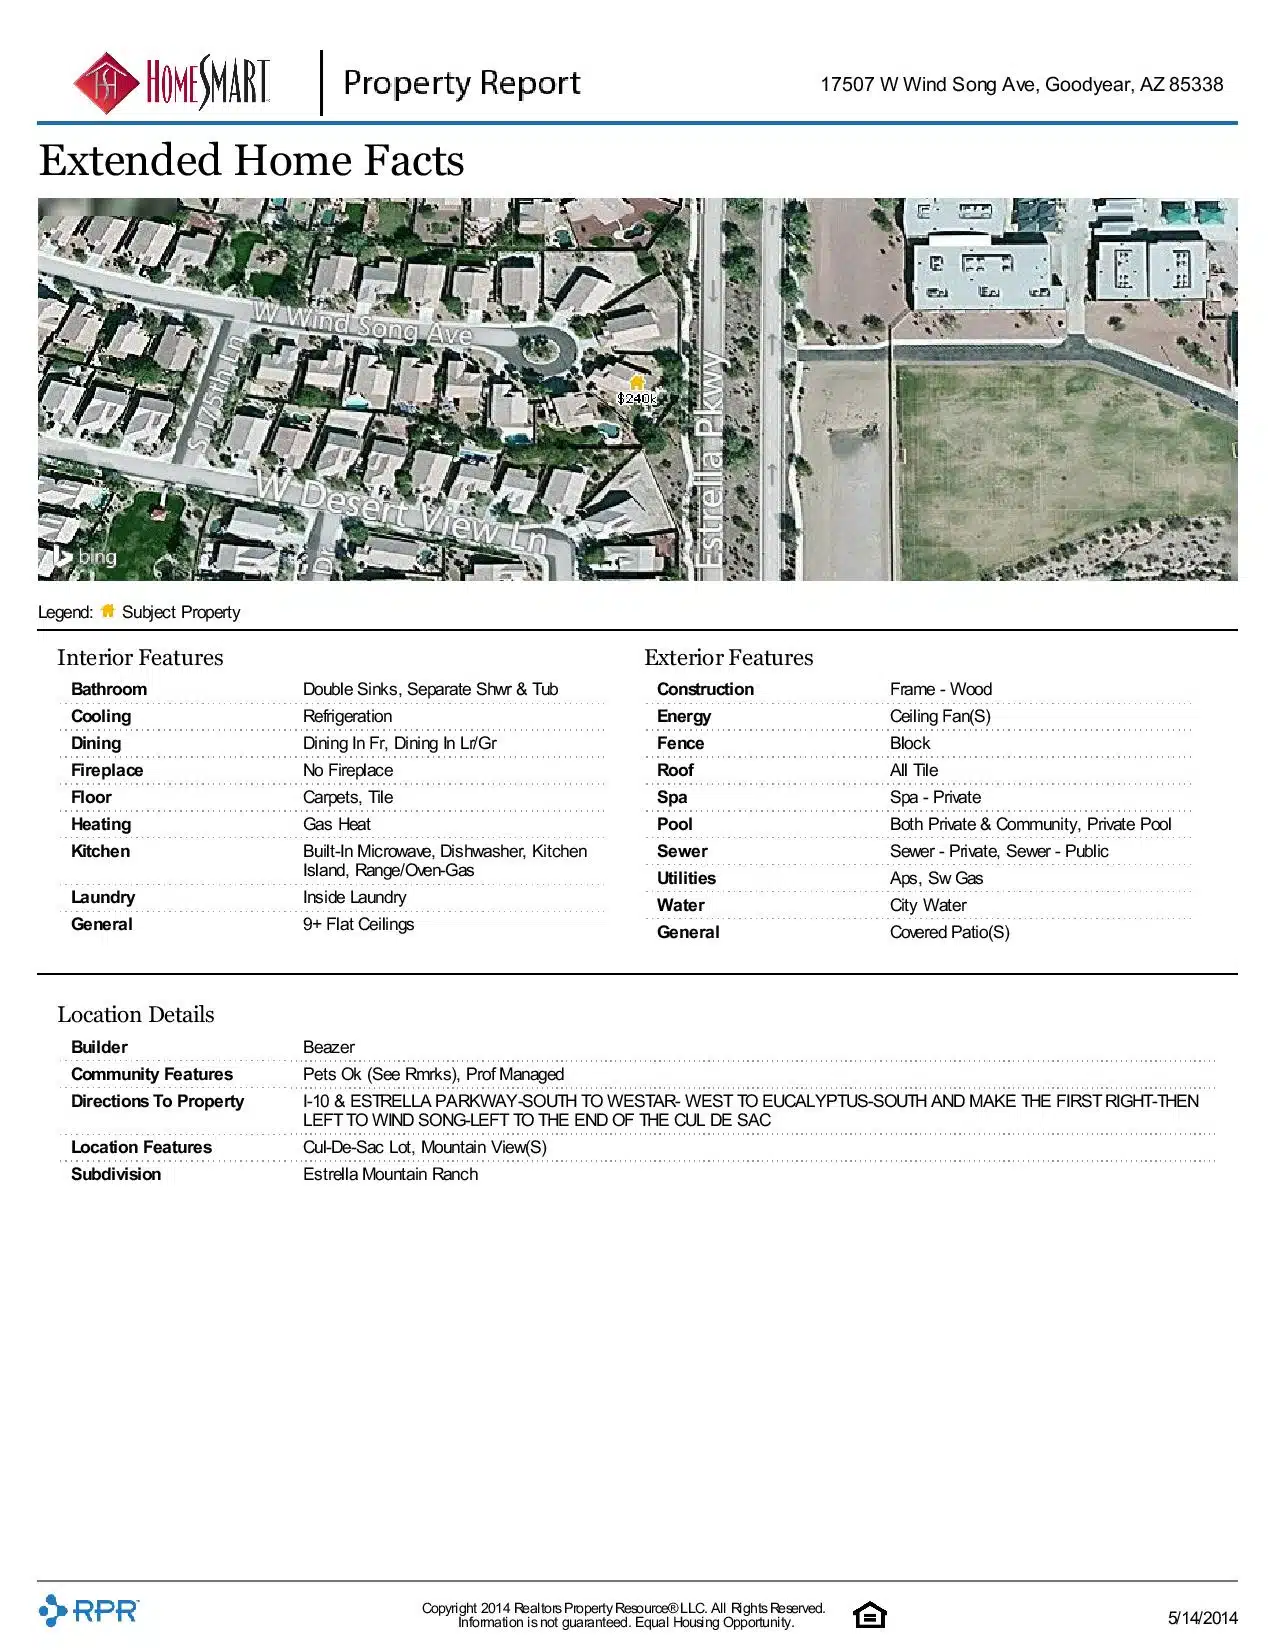 17507-W-Wind-Song-Ave-Goodyear-AZ-85338-page-004